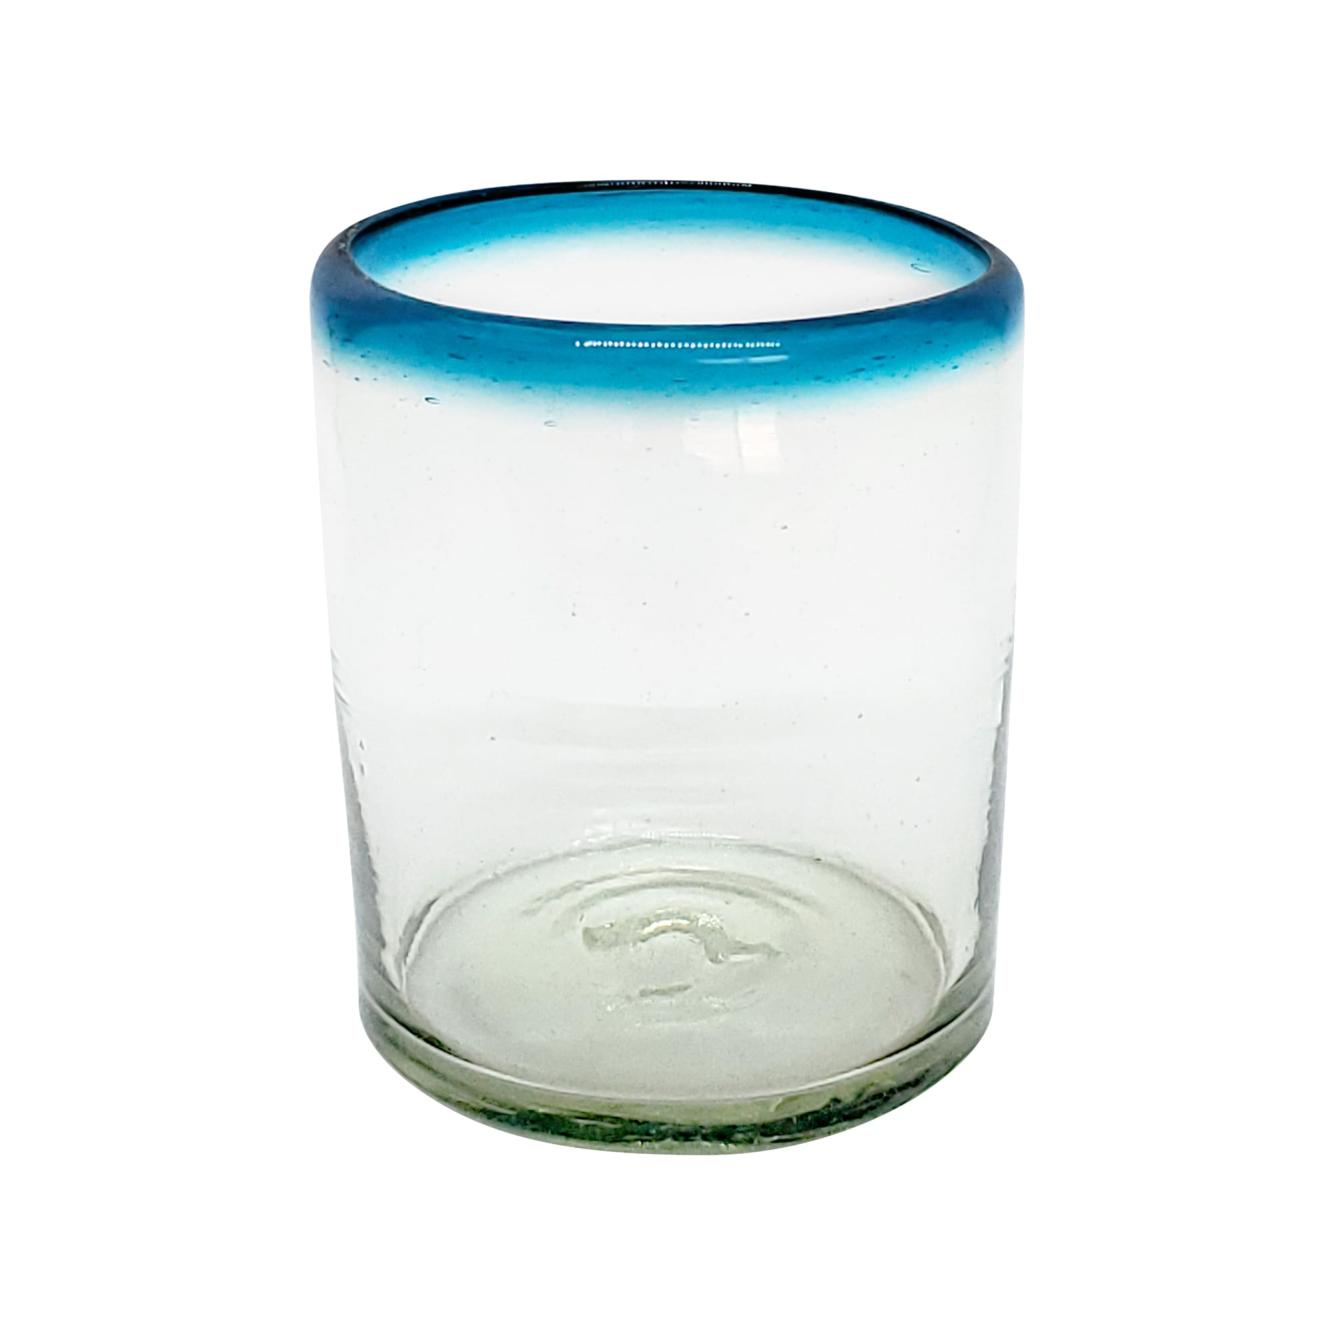 MEXICAN GLASSWARE / Aqua Blue Rim 10 oz Tumblers (set of 6) / These tumblers are a great complement for your pitcher and drinking glasses set.<br>1-Year Product Replacement in case of defects (glasses broken in dishwasher is considered a defect).